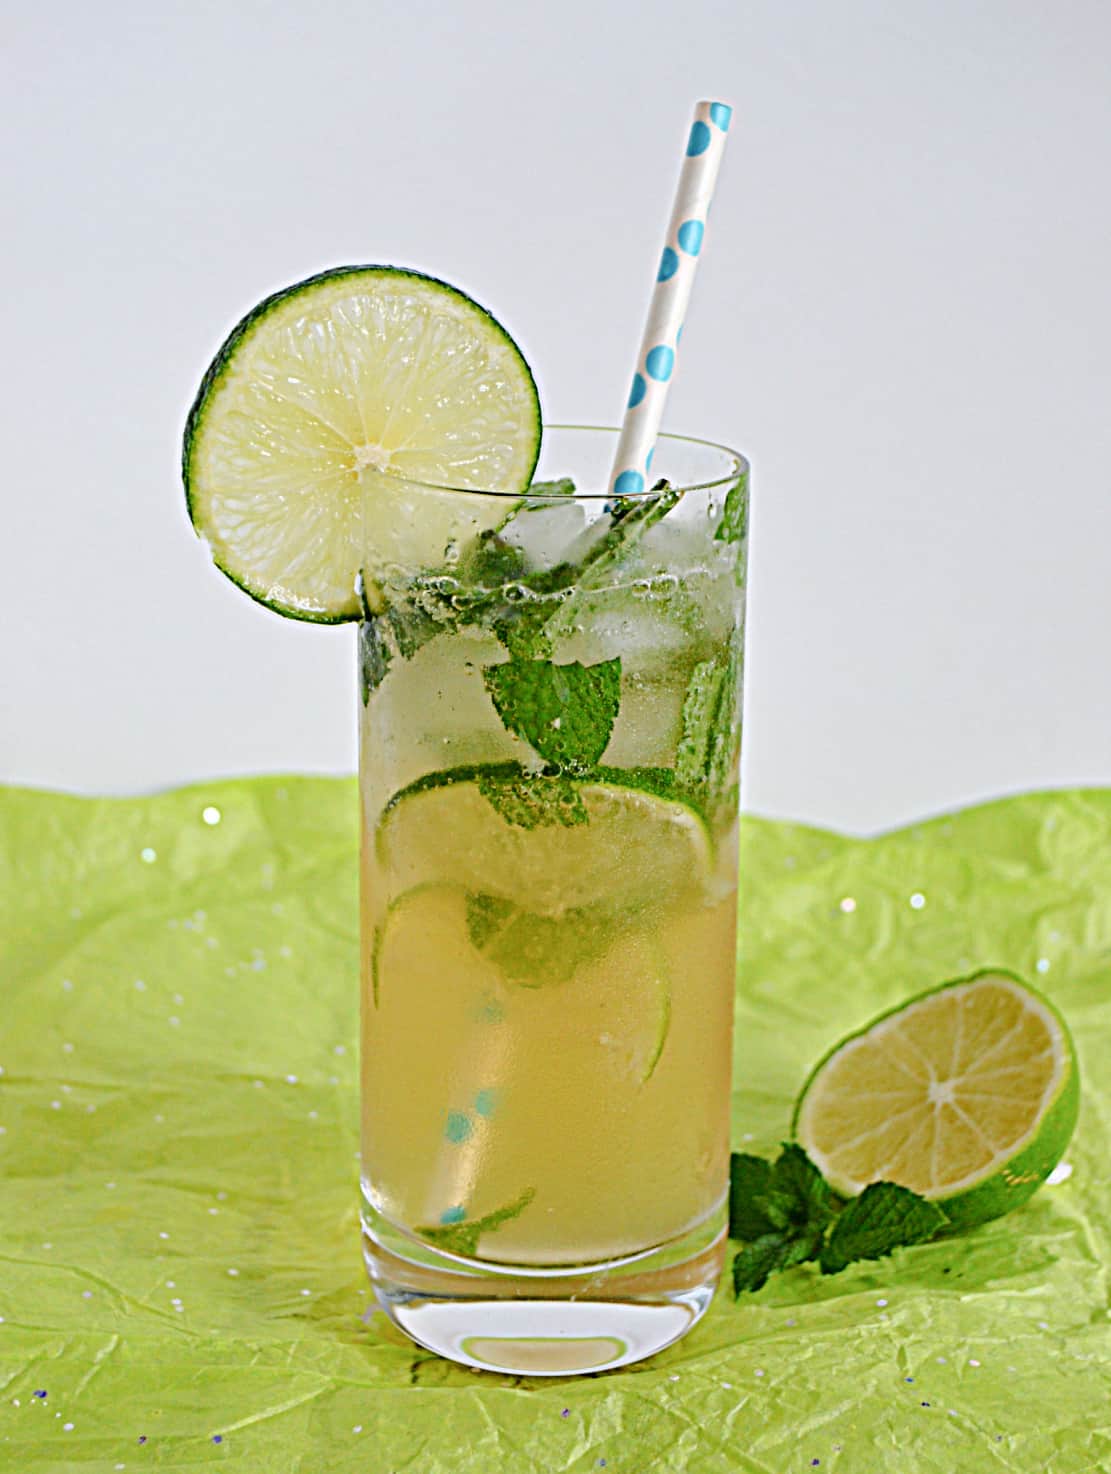 A glass of mojito with a lime slice on the rim and a straw stuck in it and a half lime on the side.